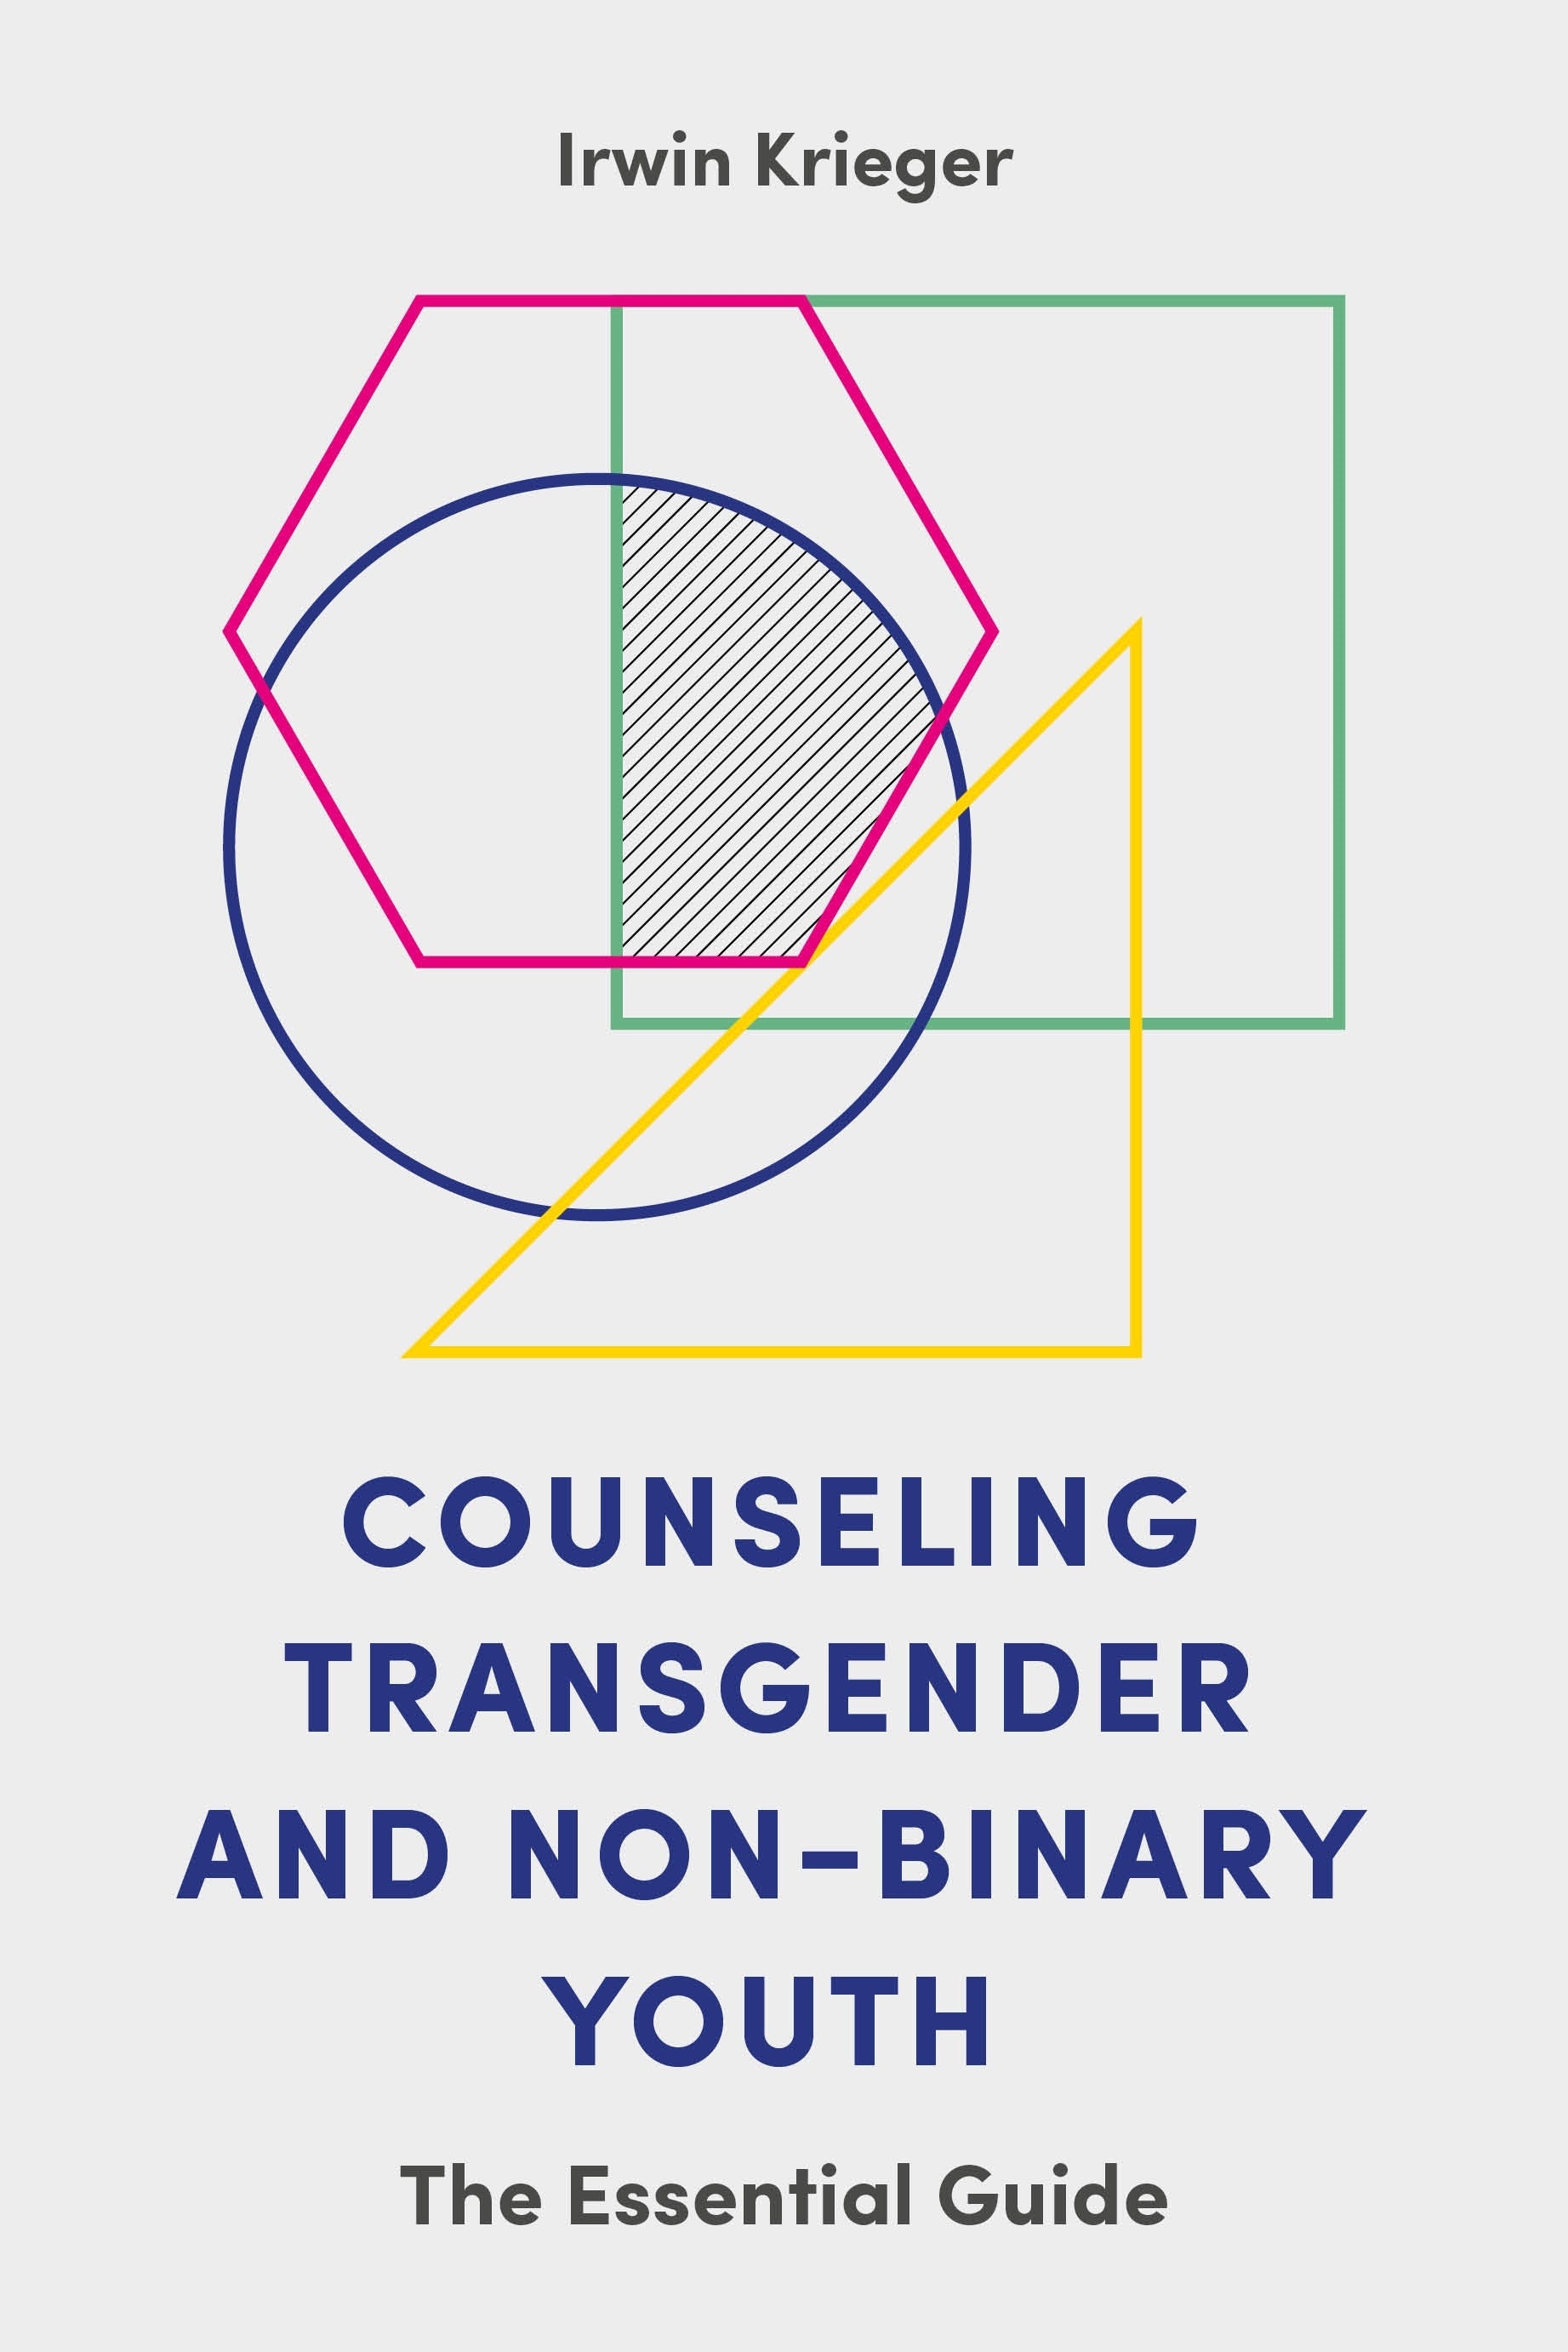 Counseling Transgender and Non-Binary Youth by Irwin Krieger